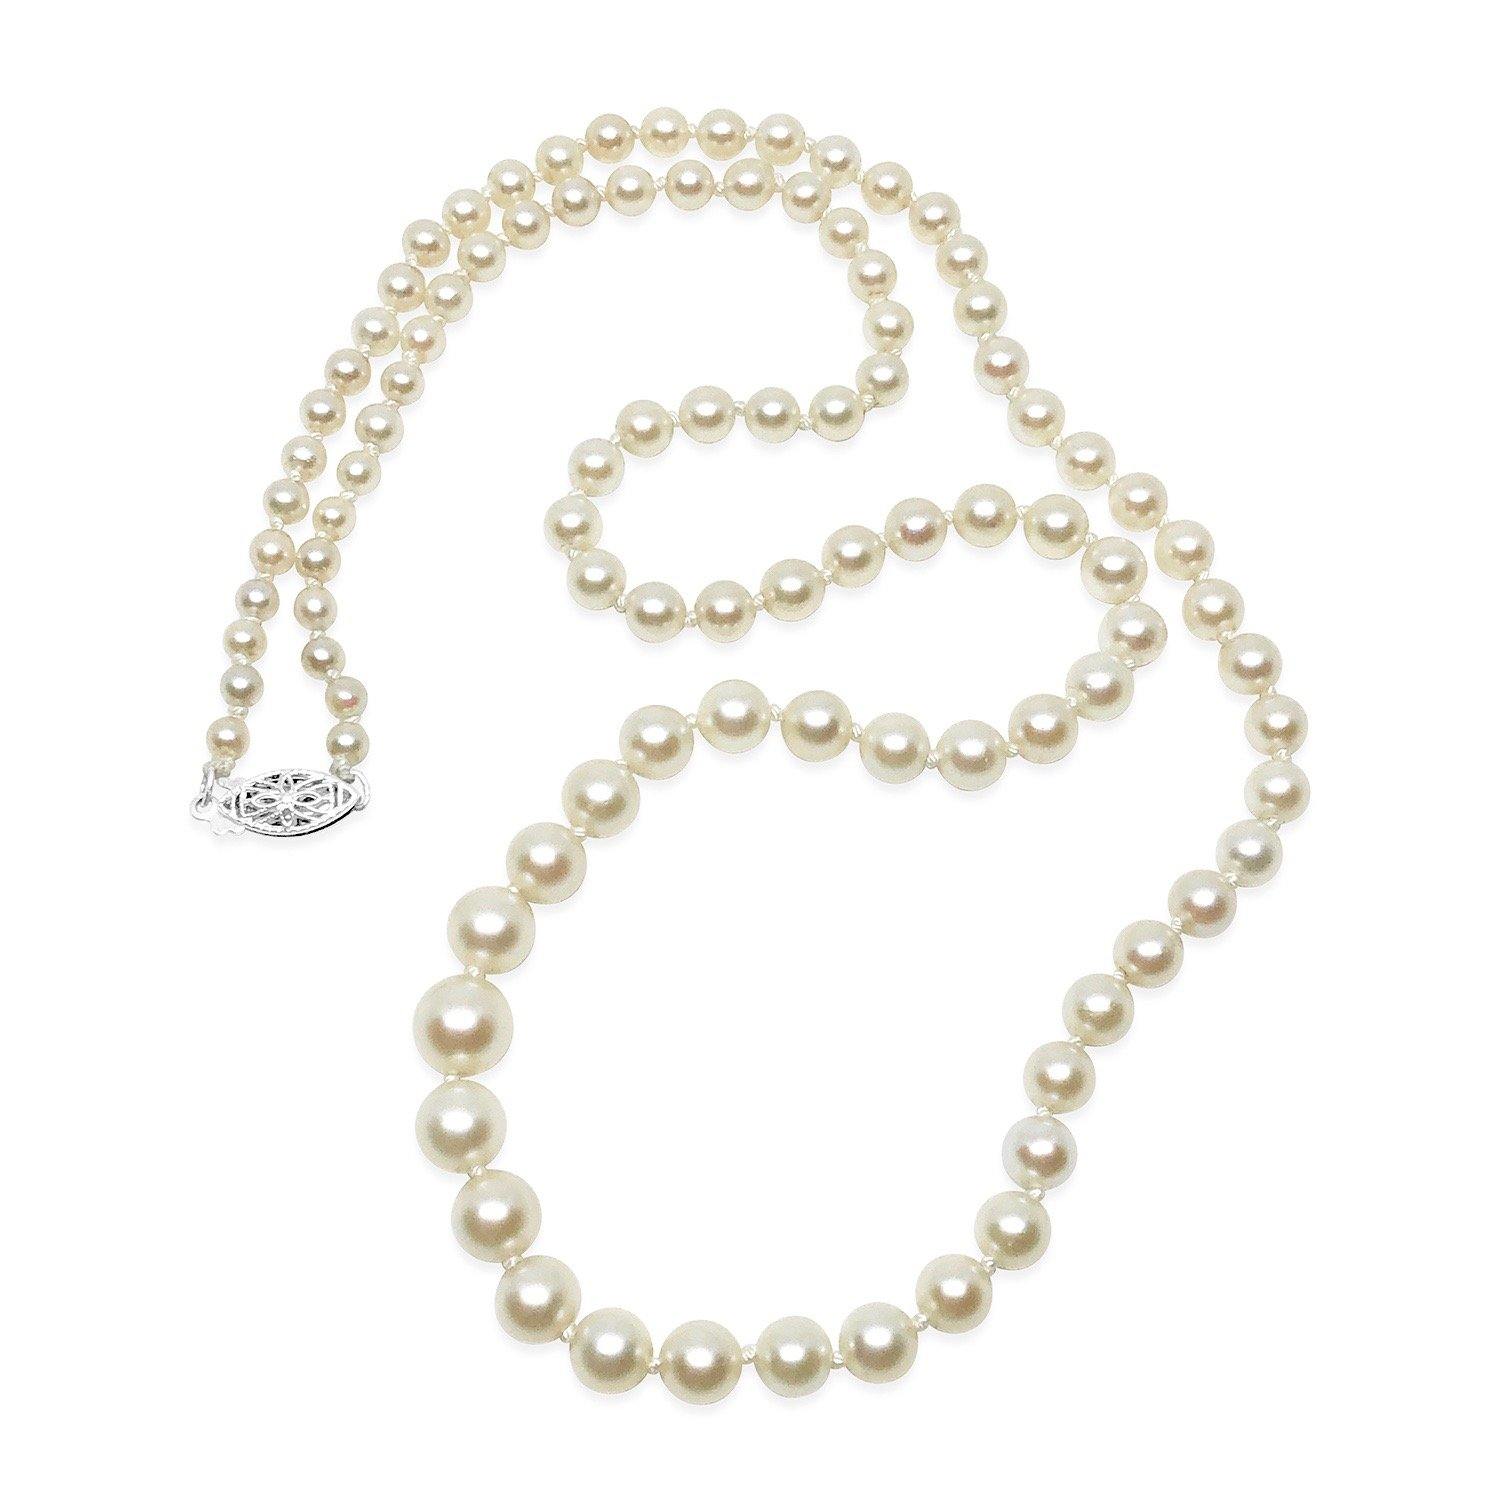 Floral Japanese Saltwater Cultured Akoya Pearl Strand - 14K White Gold 20.50 Inch - Vintage Valuable Pearls